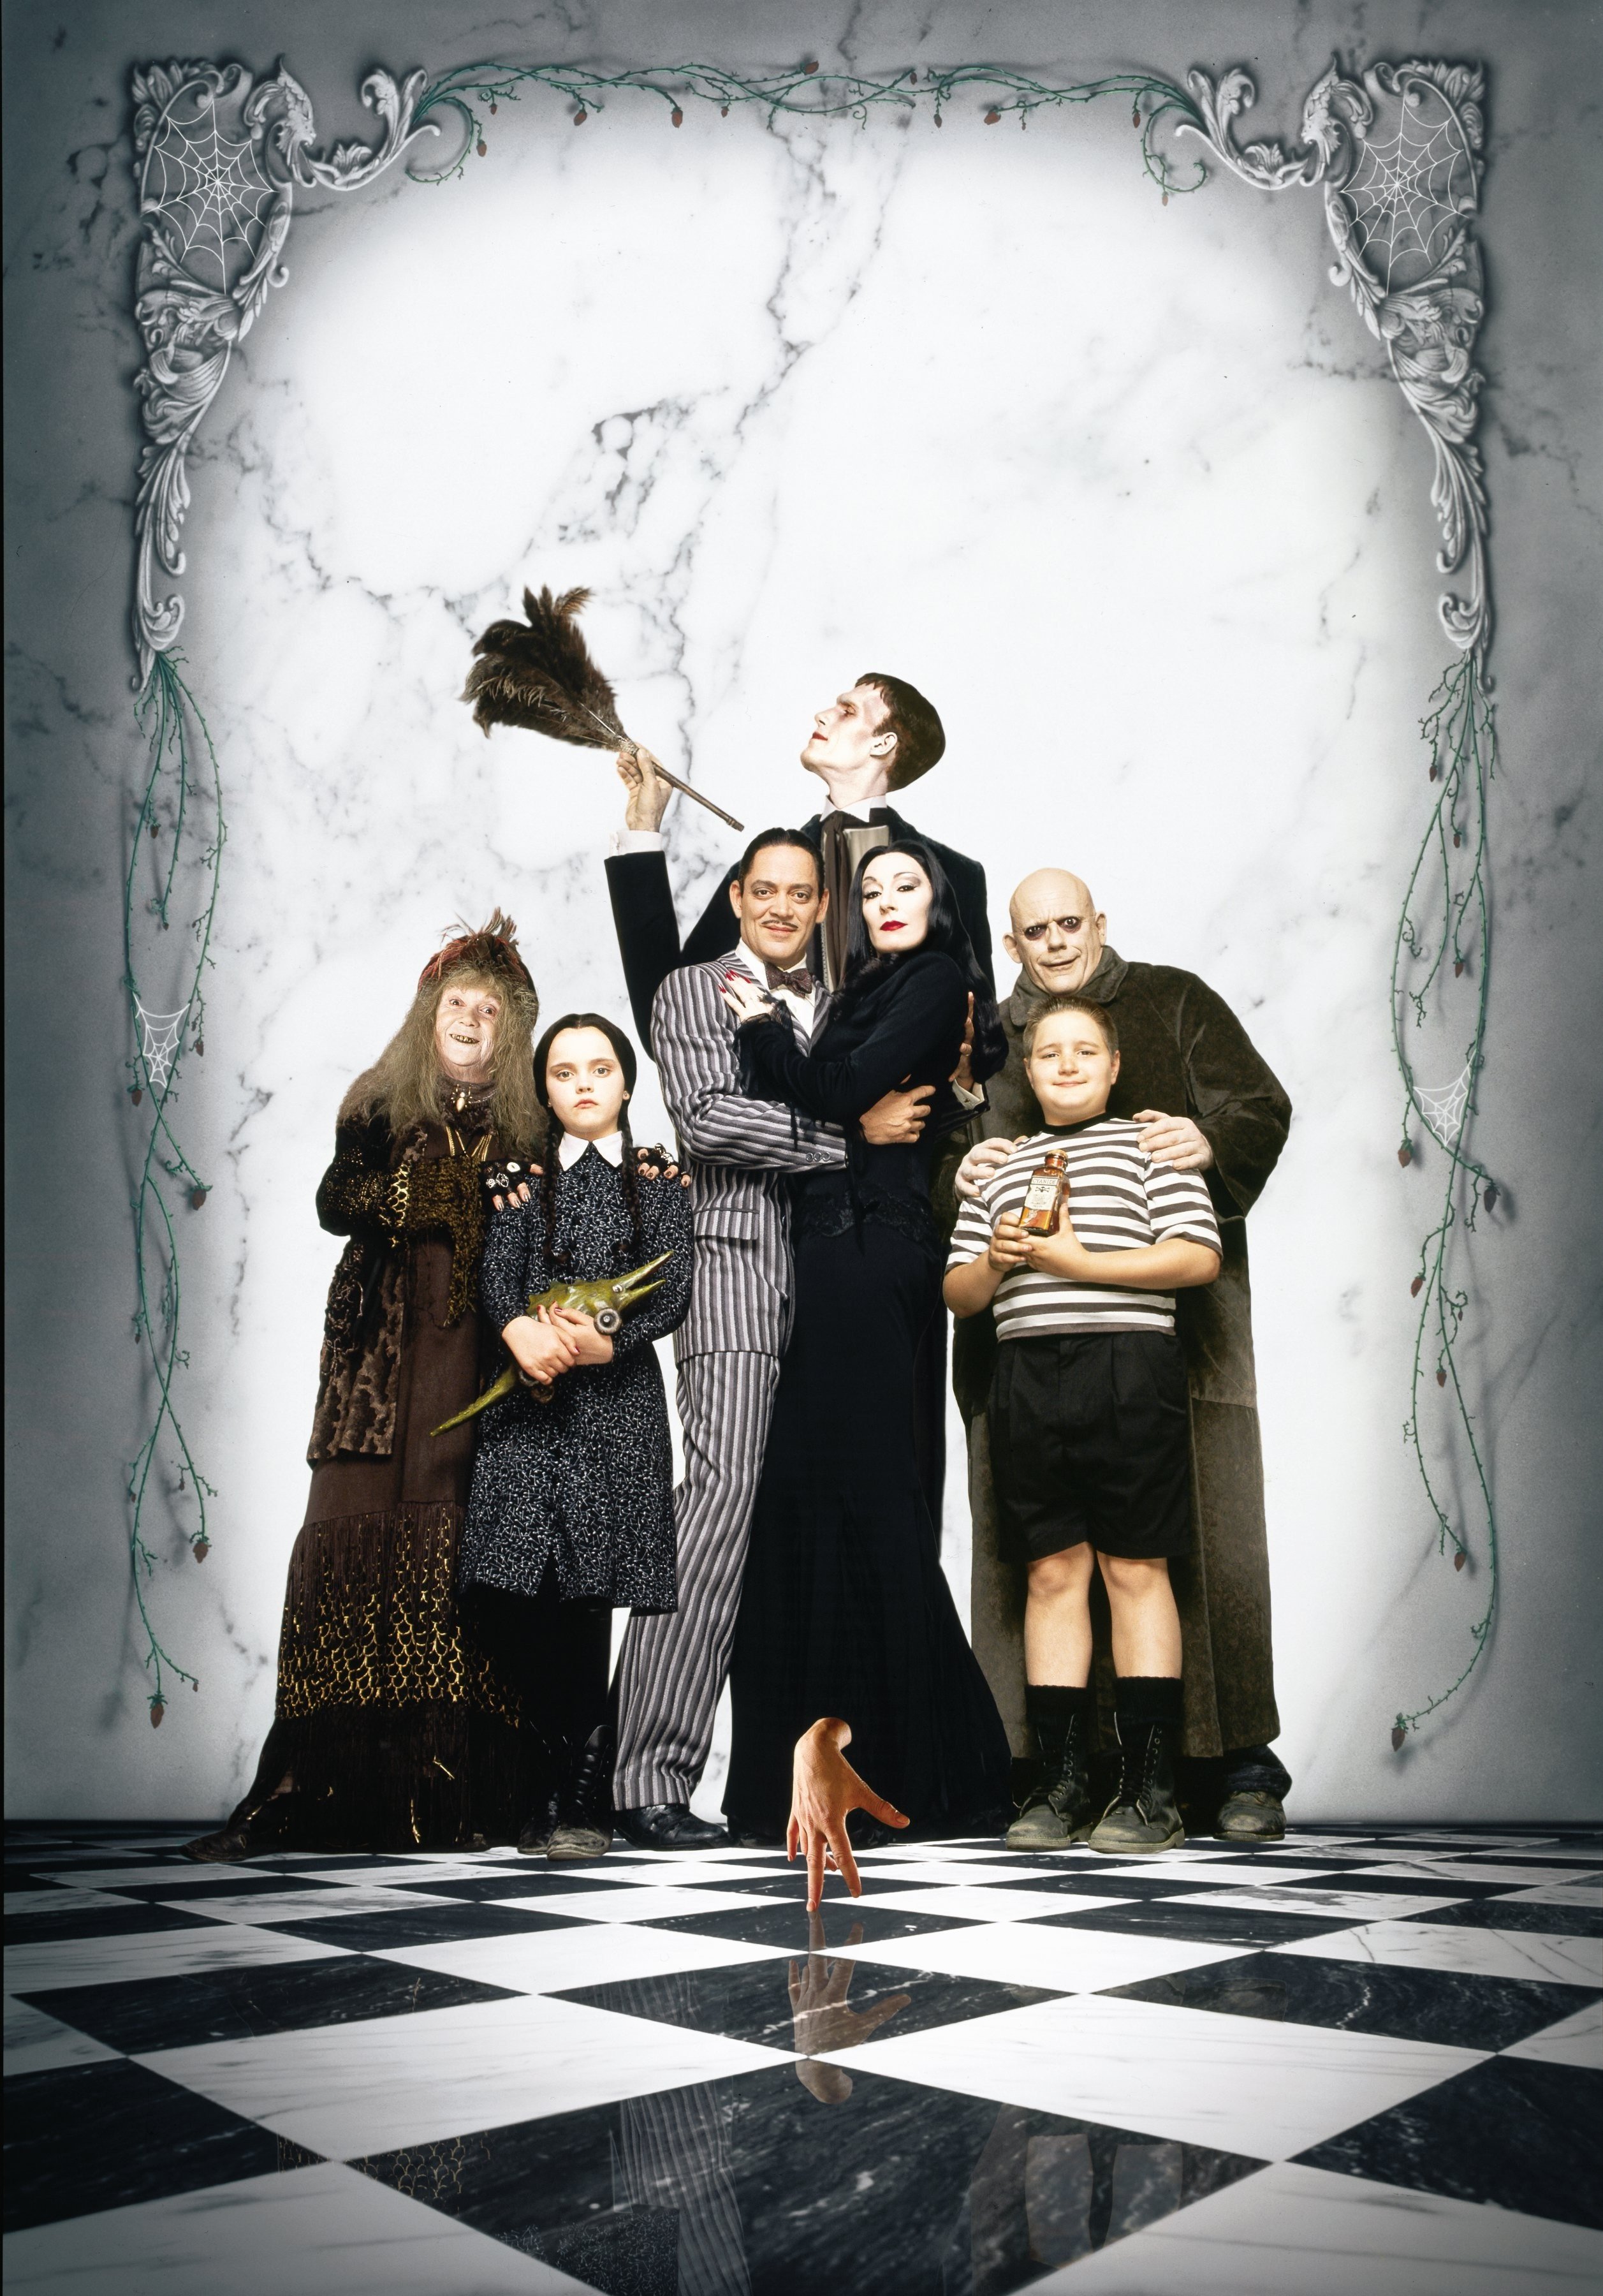 The Addams Family 1080P, 2k, 4k HD wallpaper, background free download